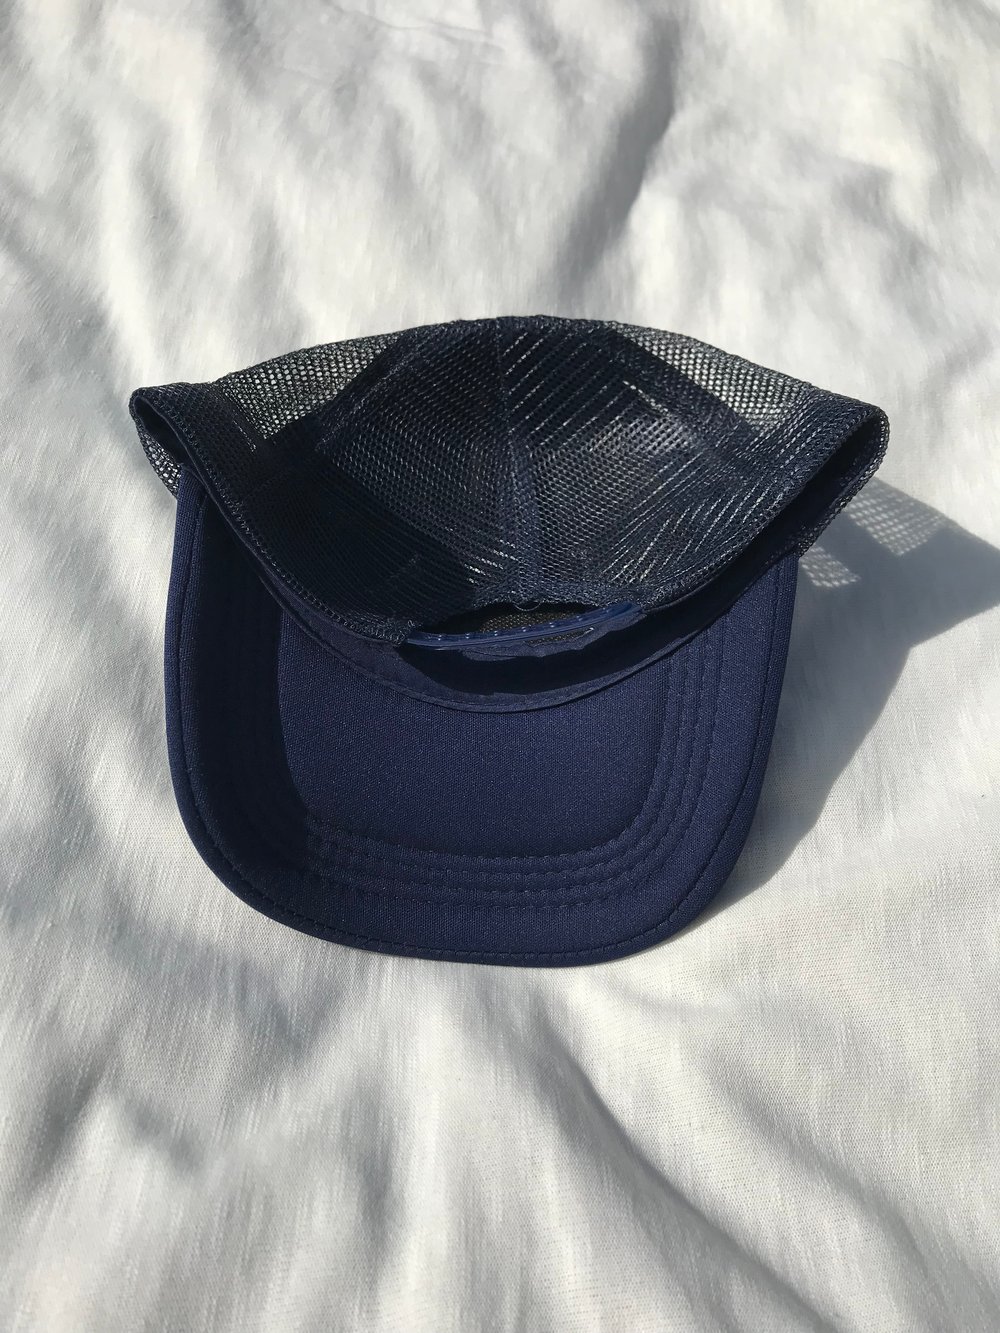 the stop being scared trucker cap in navy blue